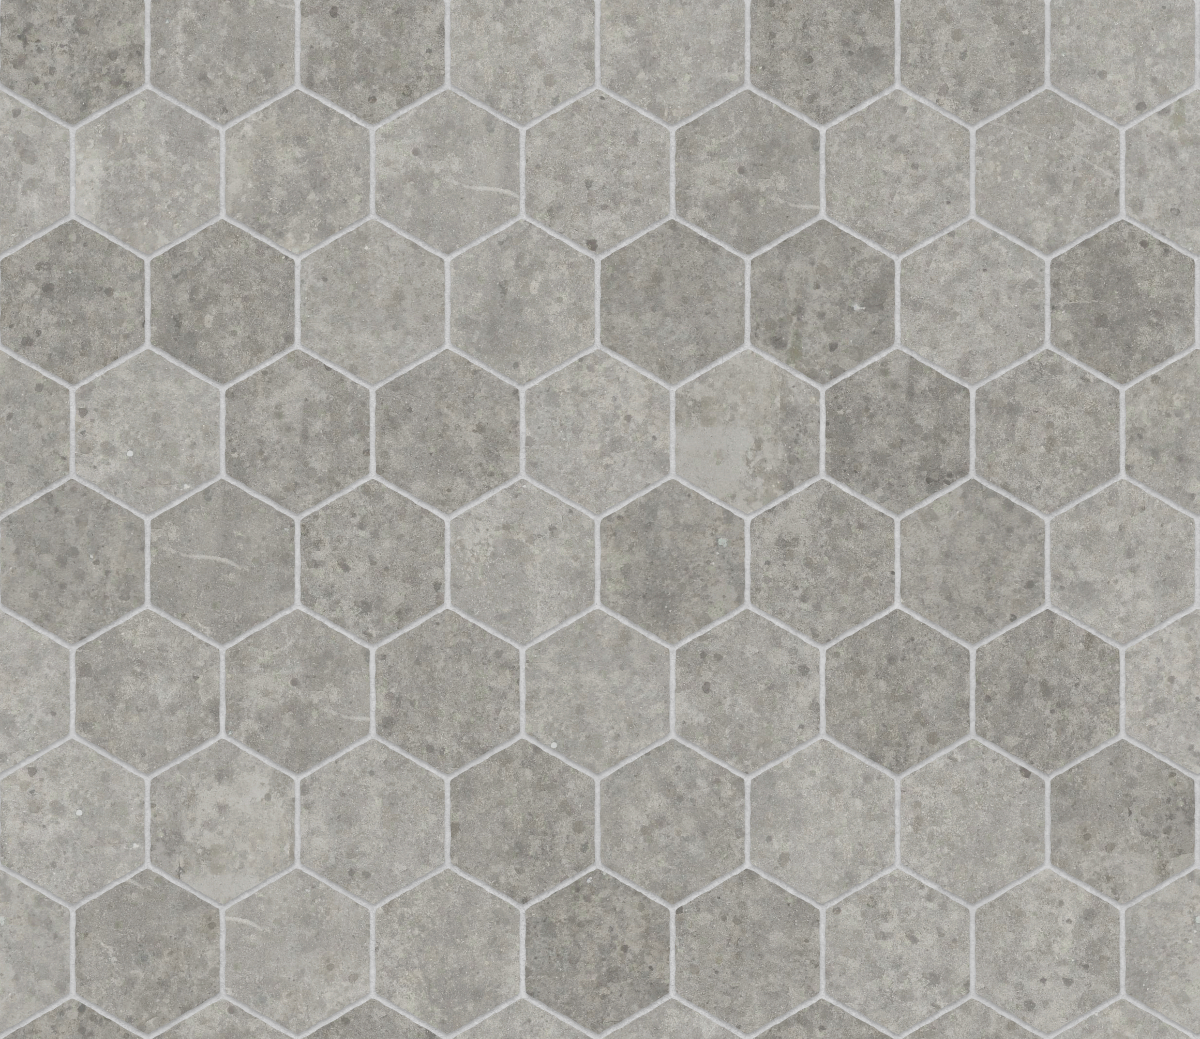 A seamless concrete texture with concrete blocks arranged in a Hexagonal pattern